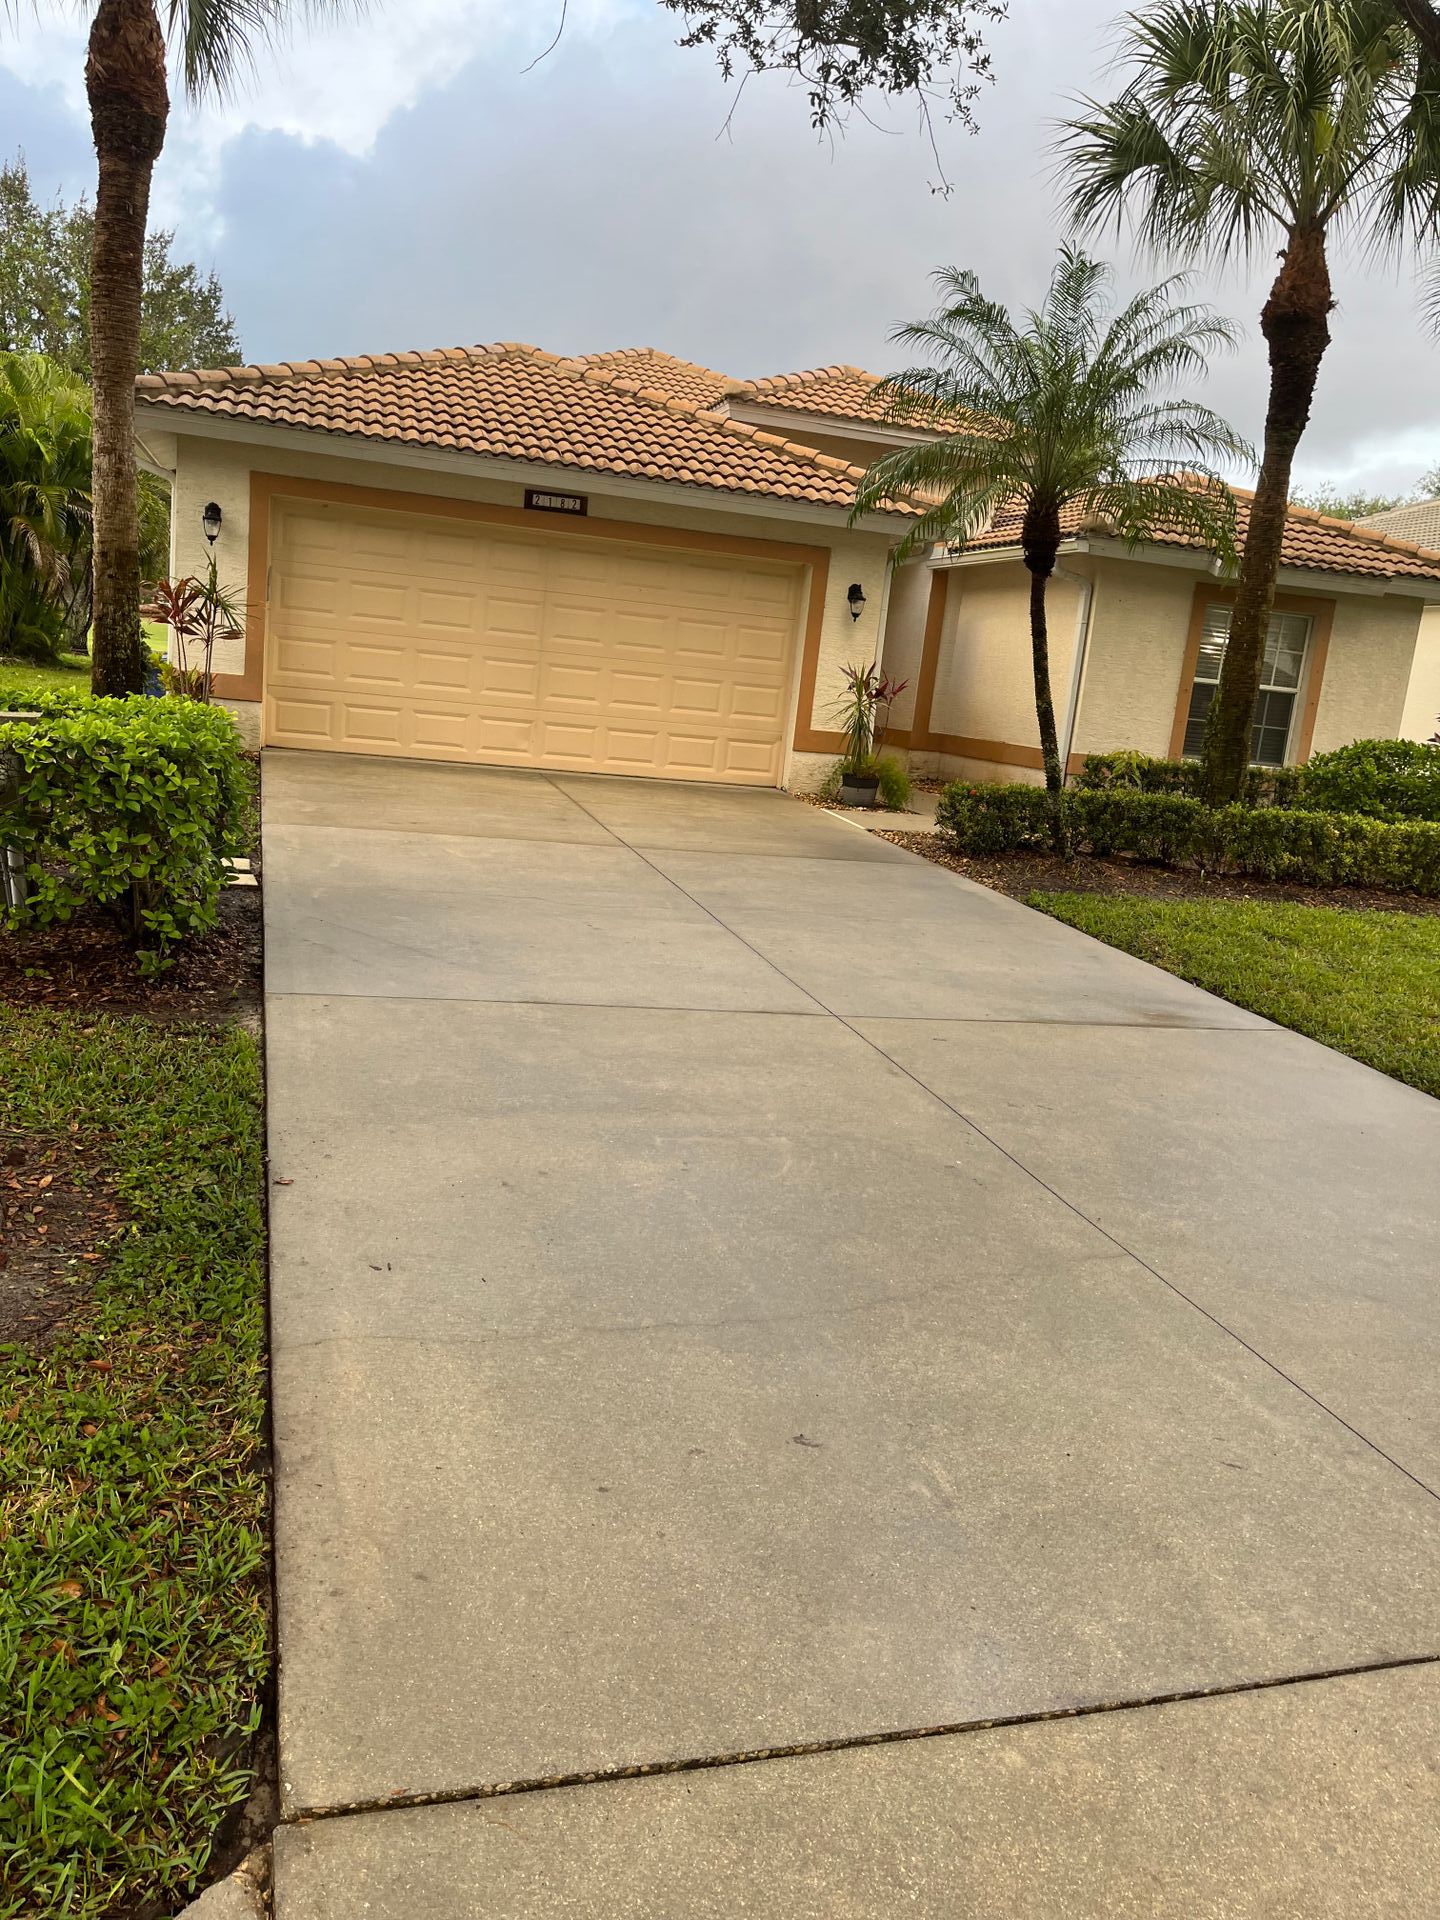 Driveway Pressure Cleaning Naples FL Home